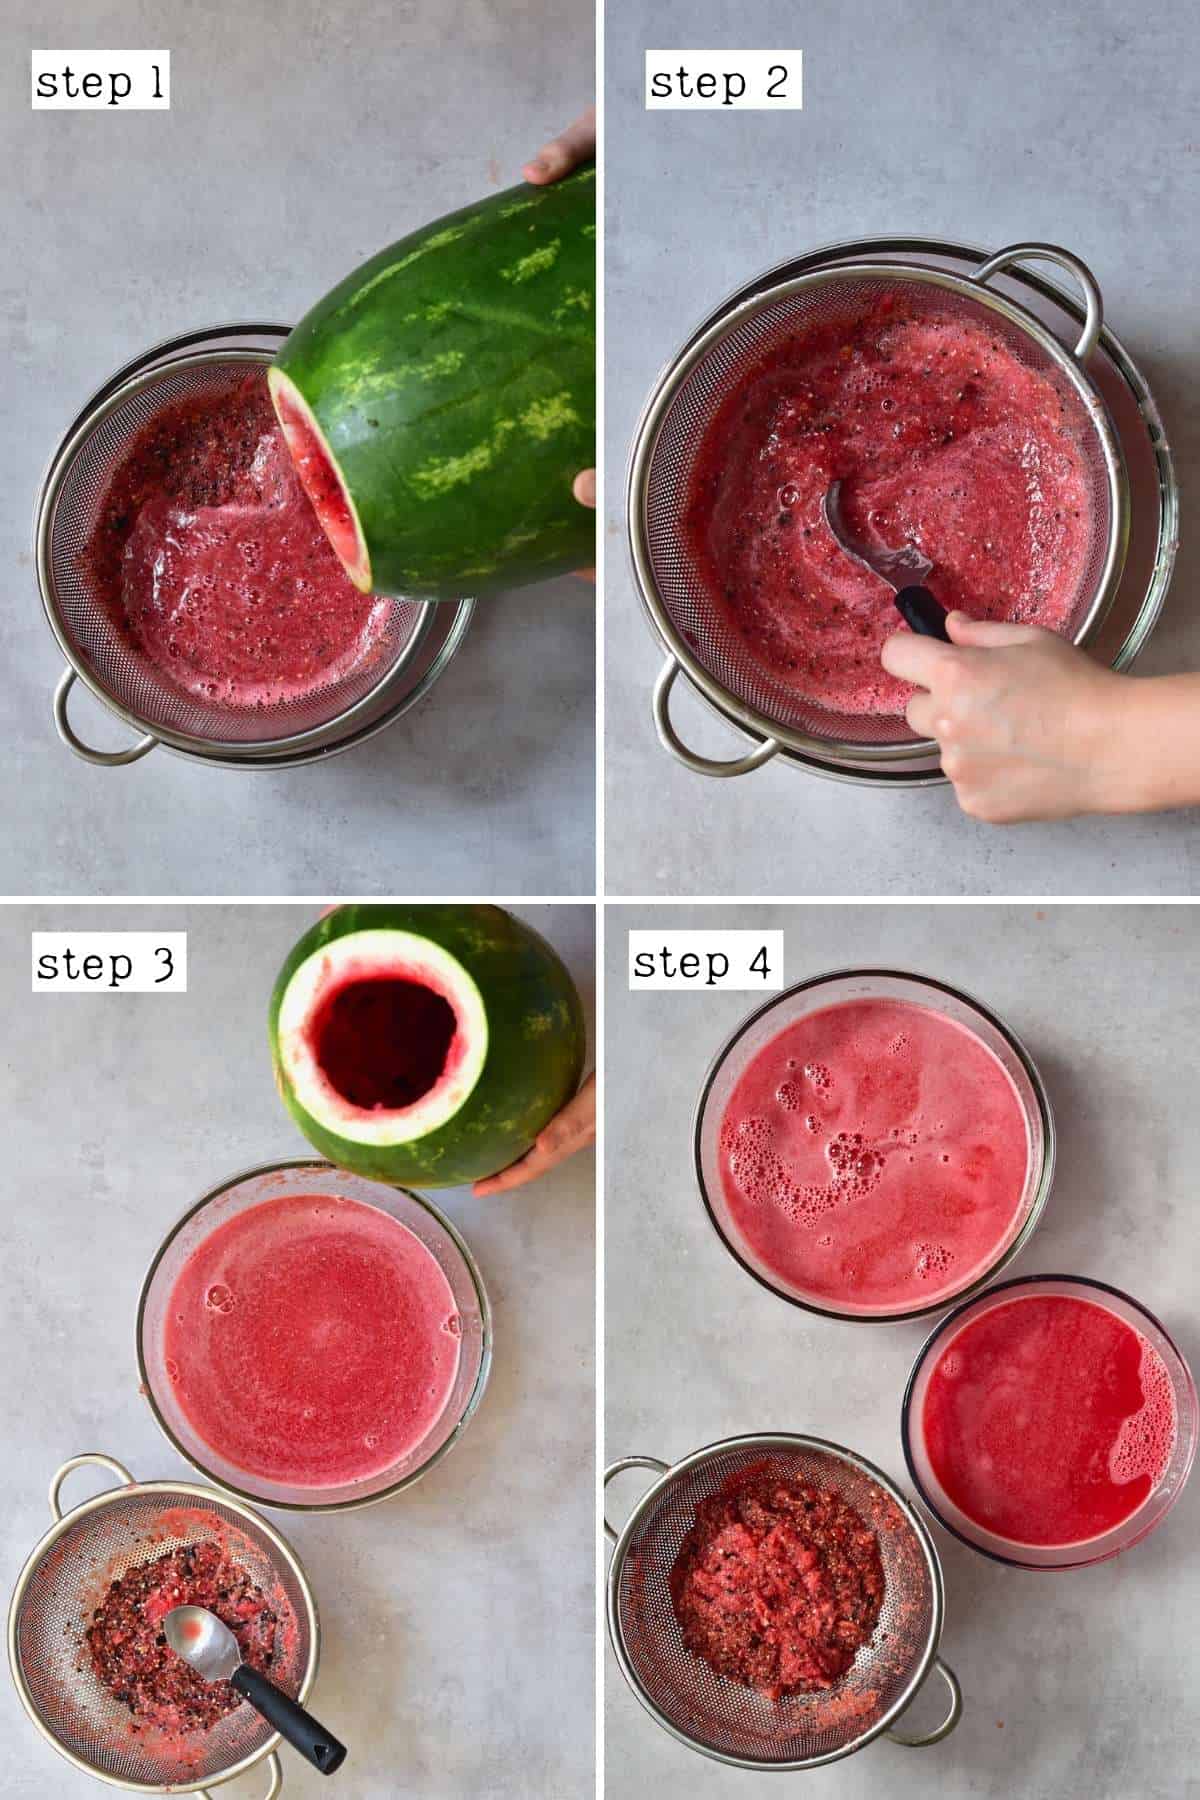 Steps for making watermelon juice